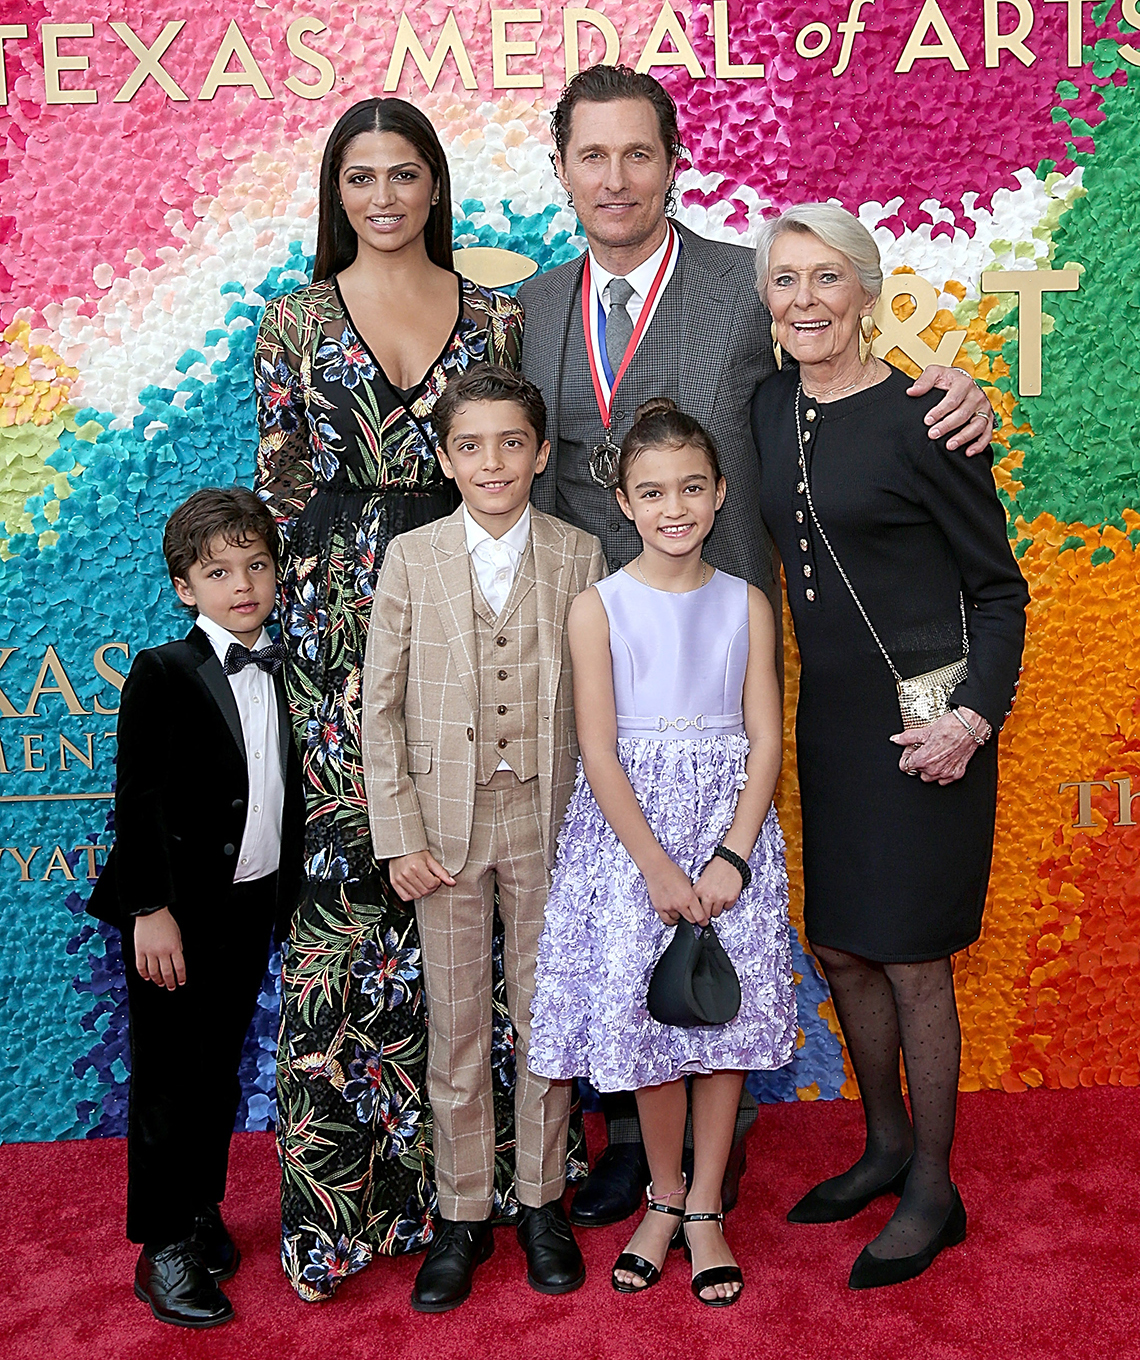 actor matthew mcconaughey with family on red carpet 